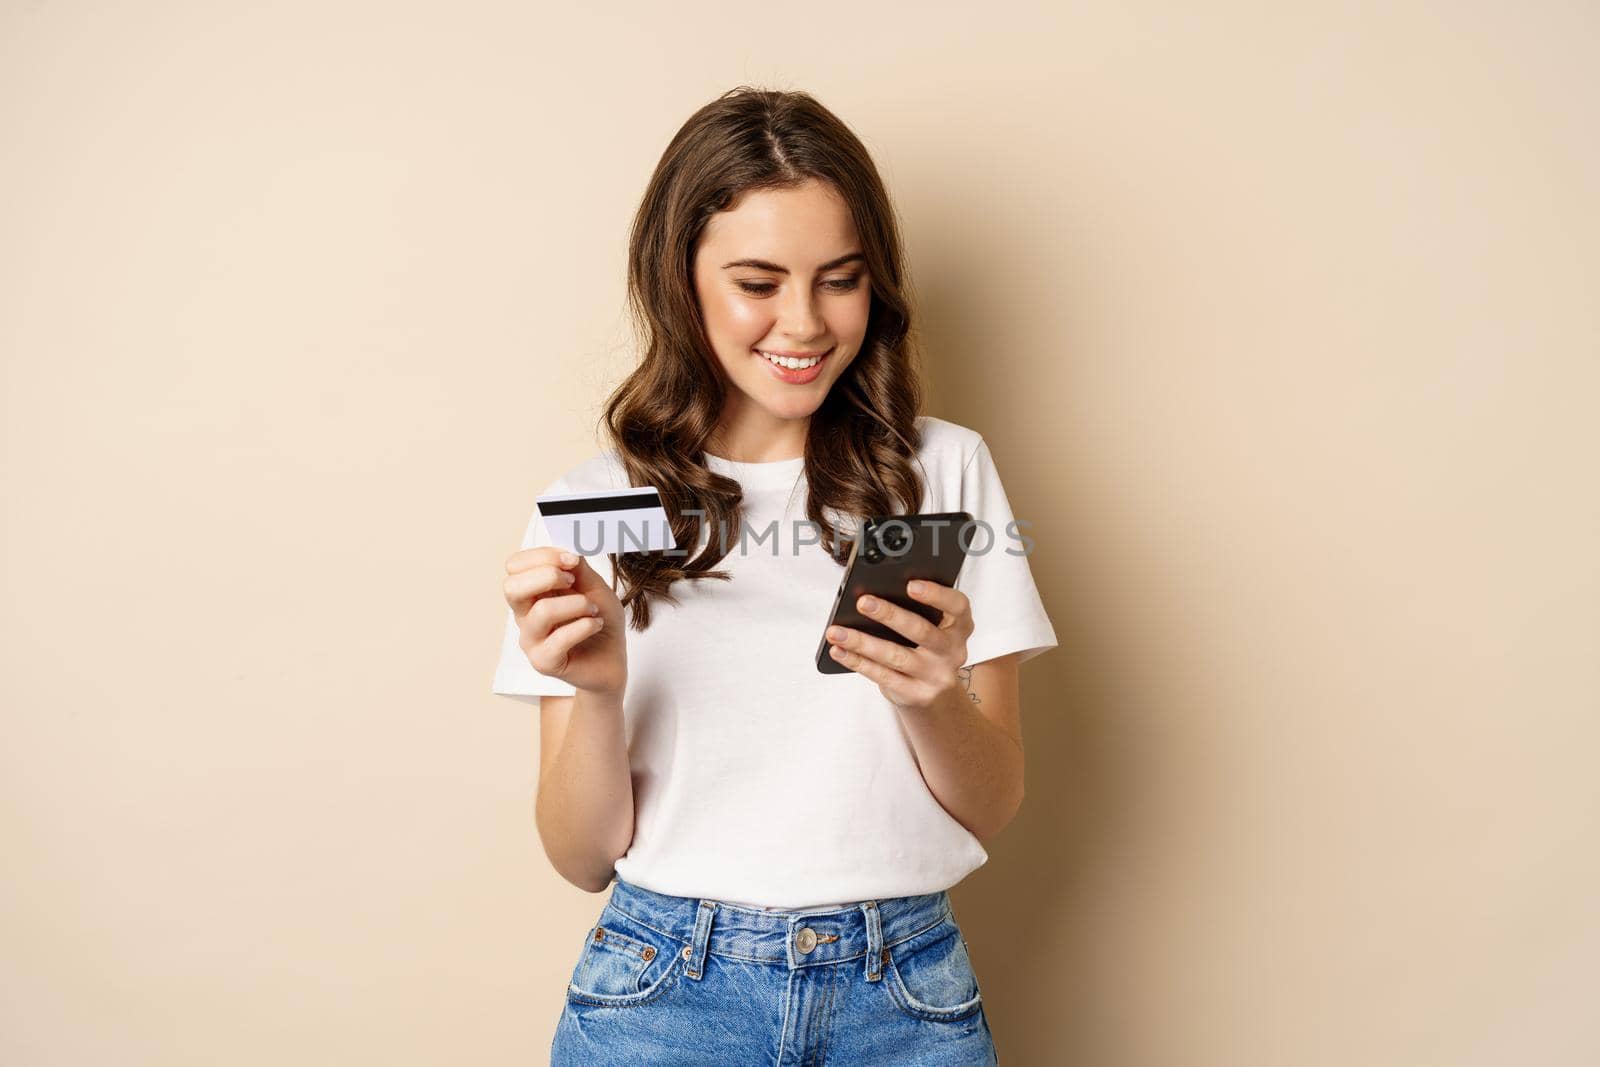 Image of young happy woman paying online, holding smartphone and credit card, enter info in application on mobile phone, standing against beige background.